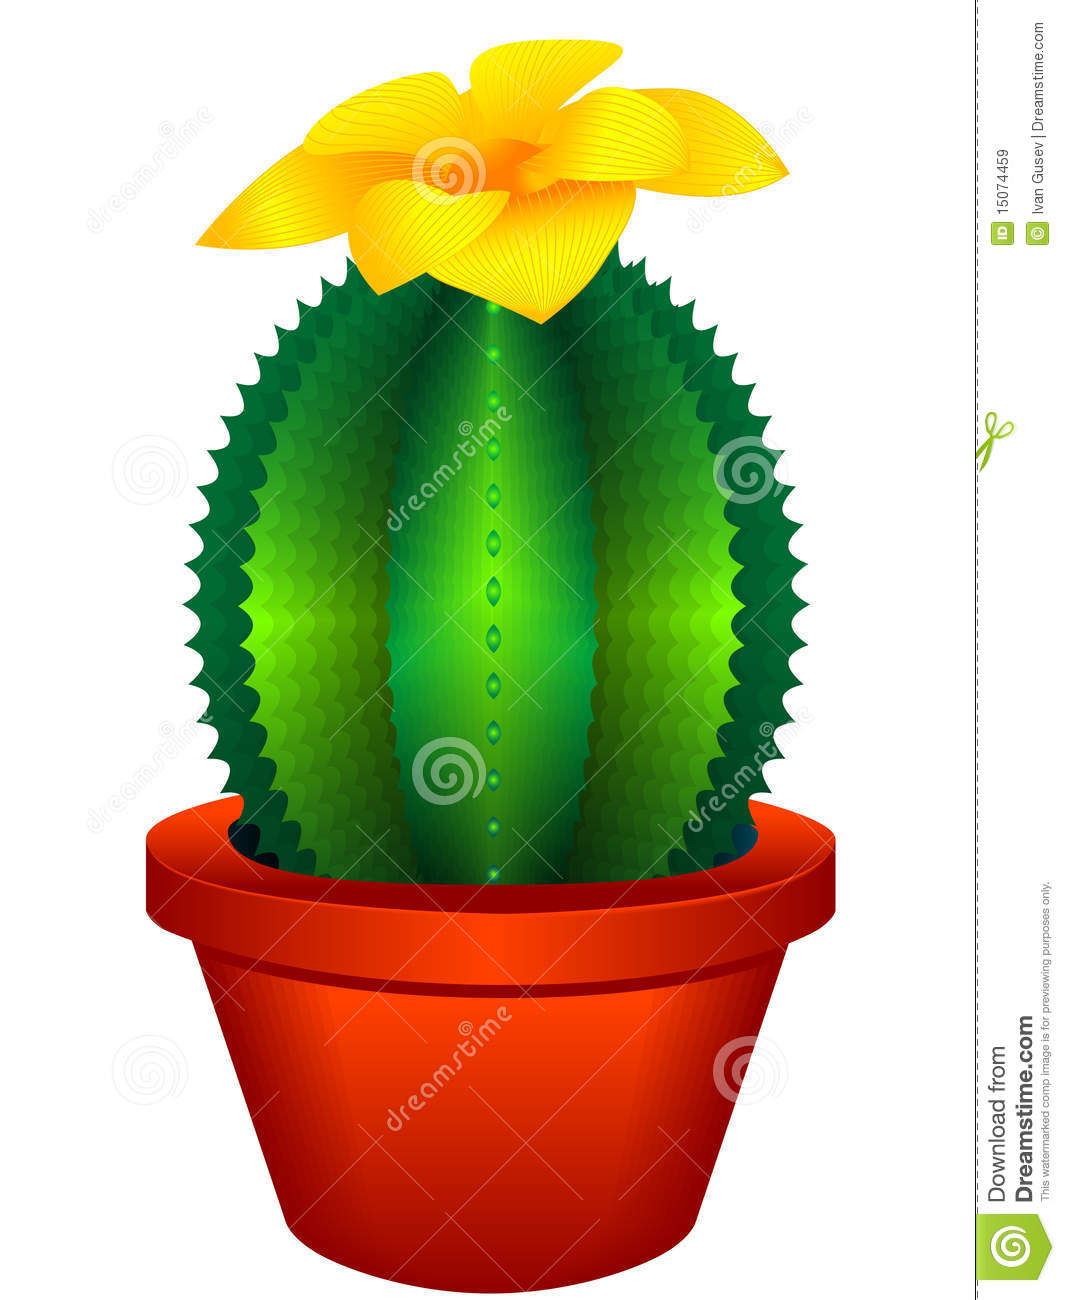 Indoor Plant A Cactus Royalty Free Stock Images   Image  15074459